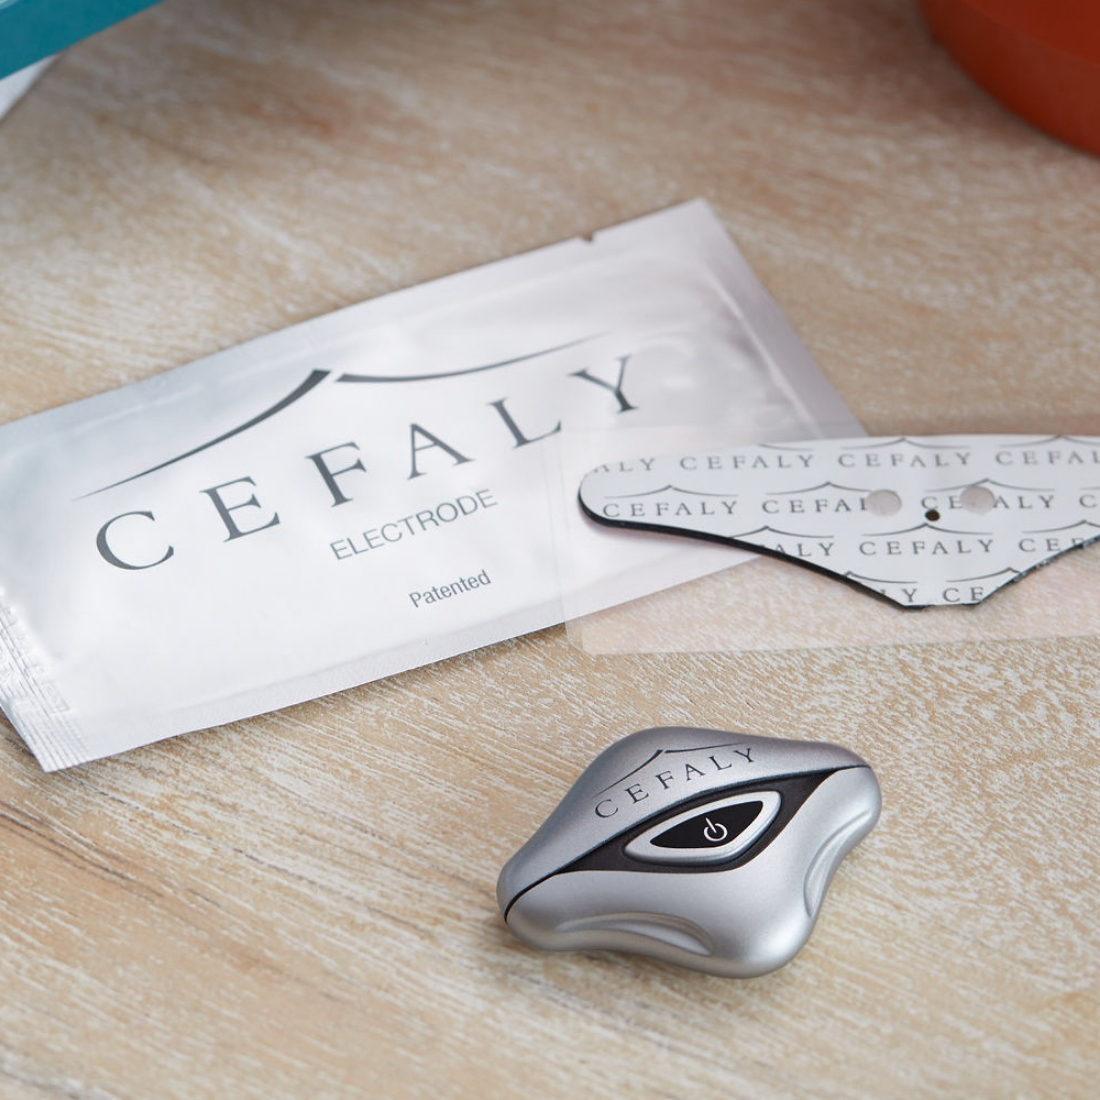  Cefaly Migraine treatment and prevention device with electrode laid out on work desk  4